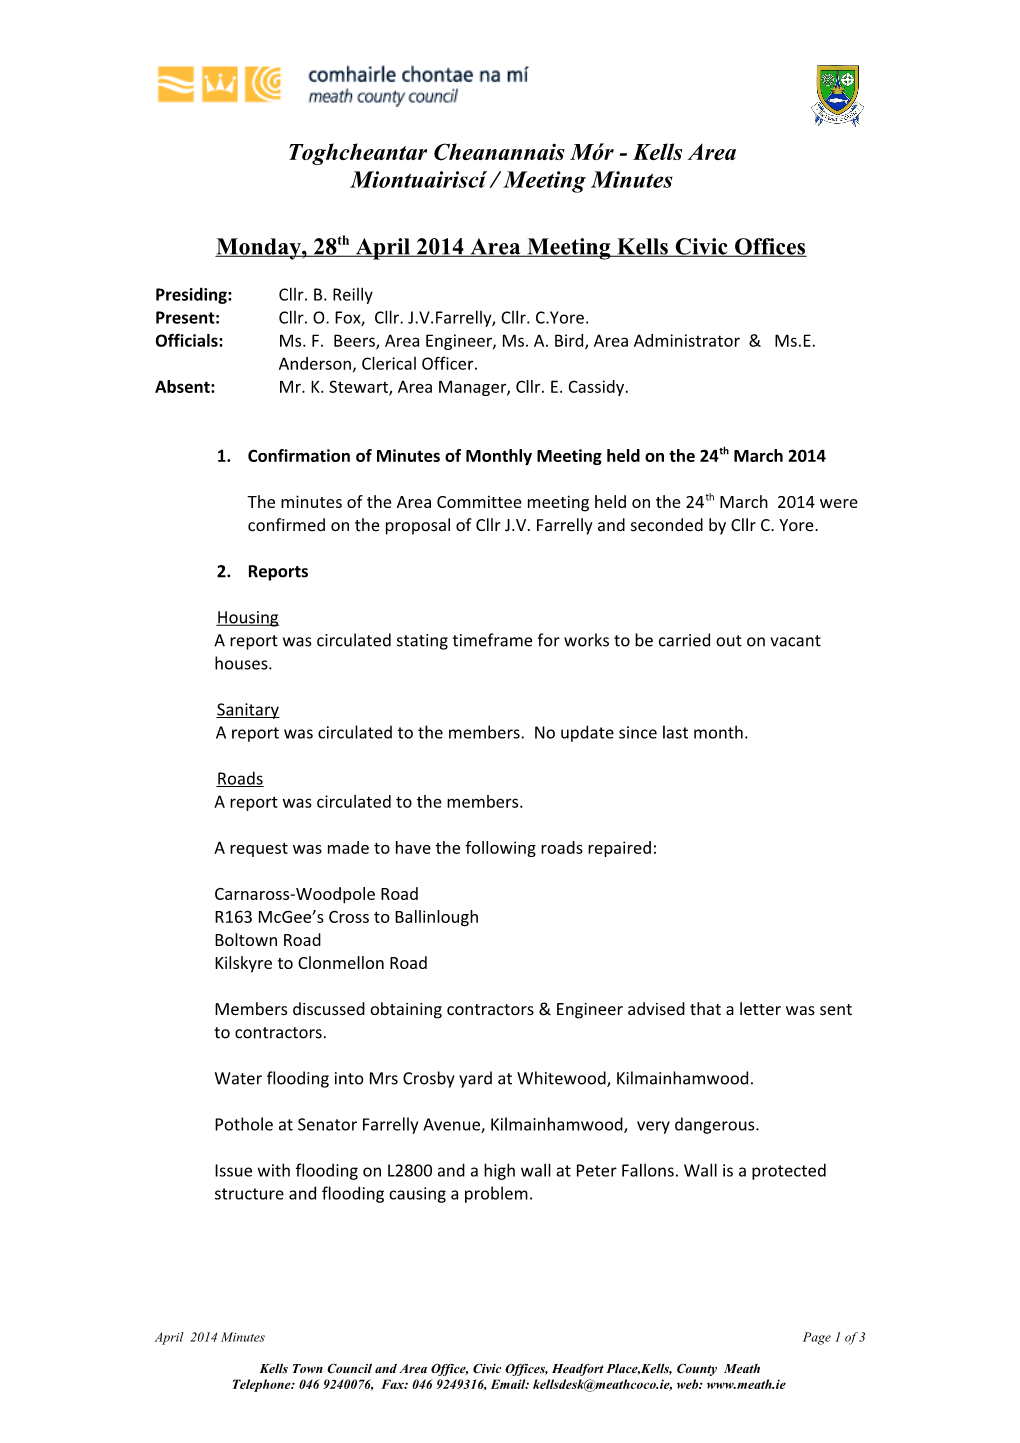 Monday, 28Th April 2014 Area Meeting Kells Civic Offices